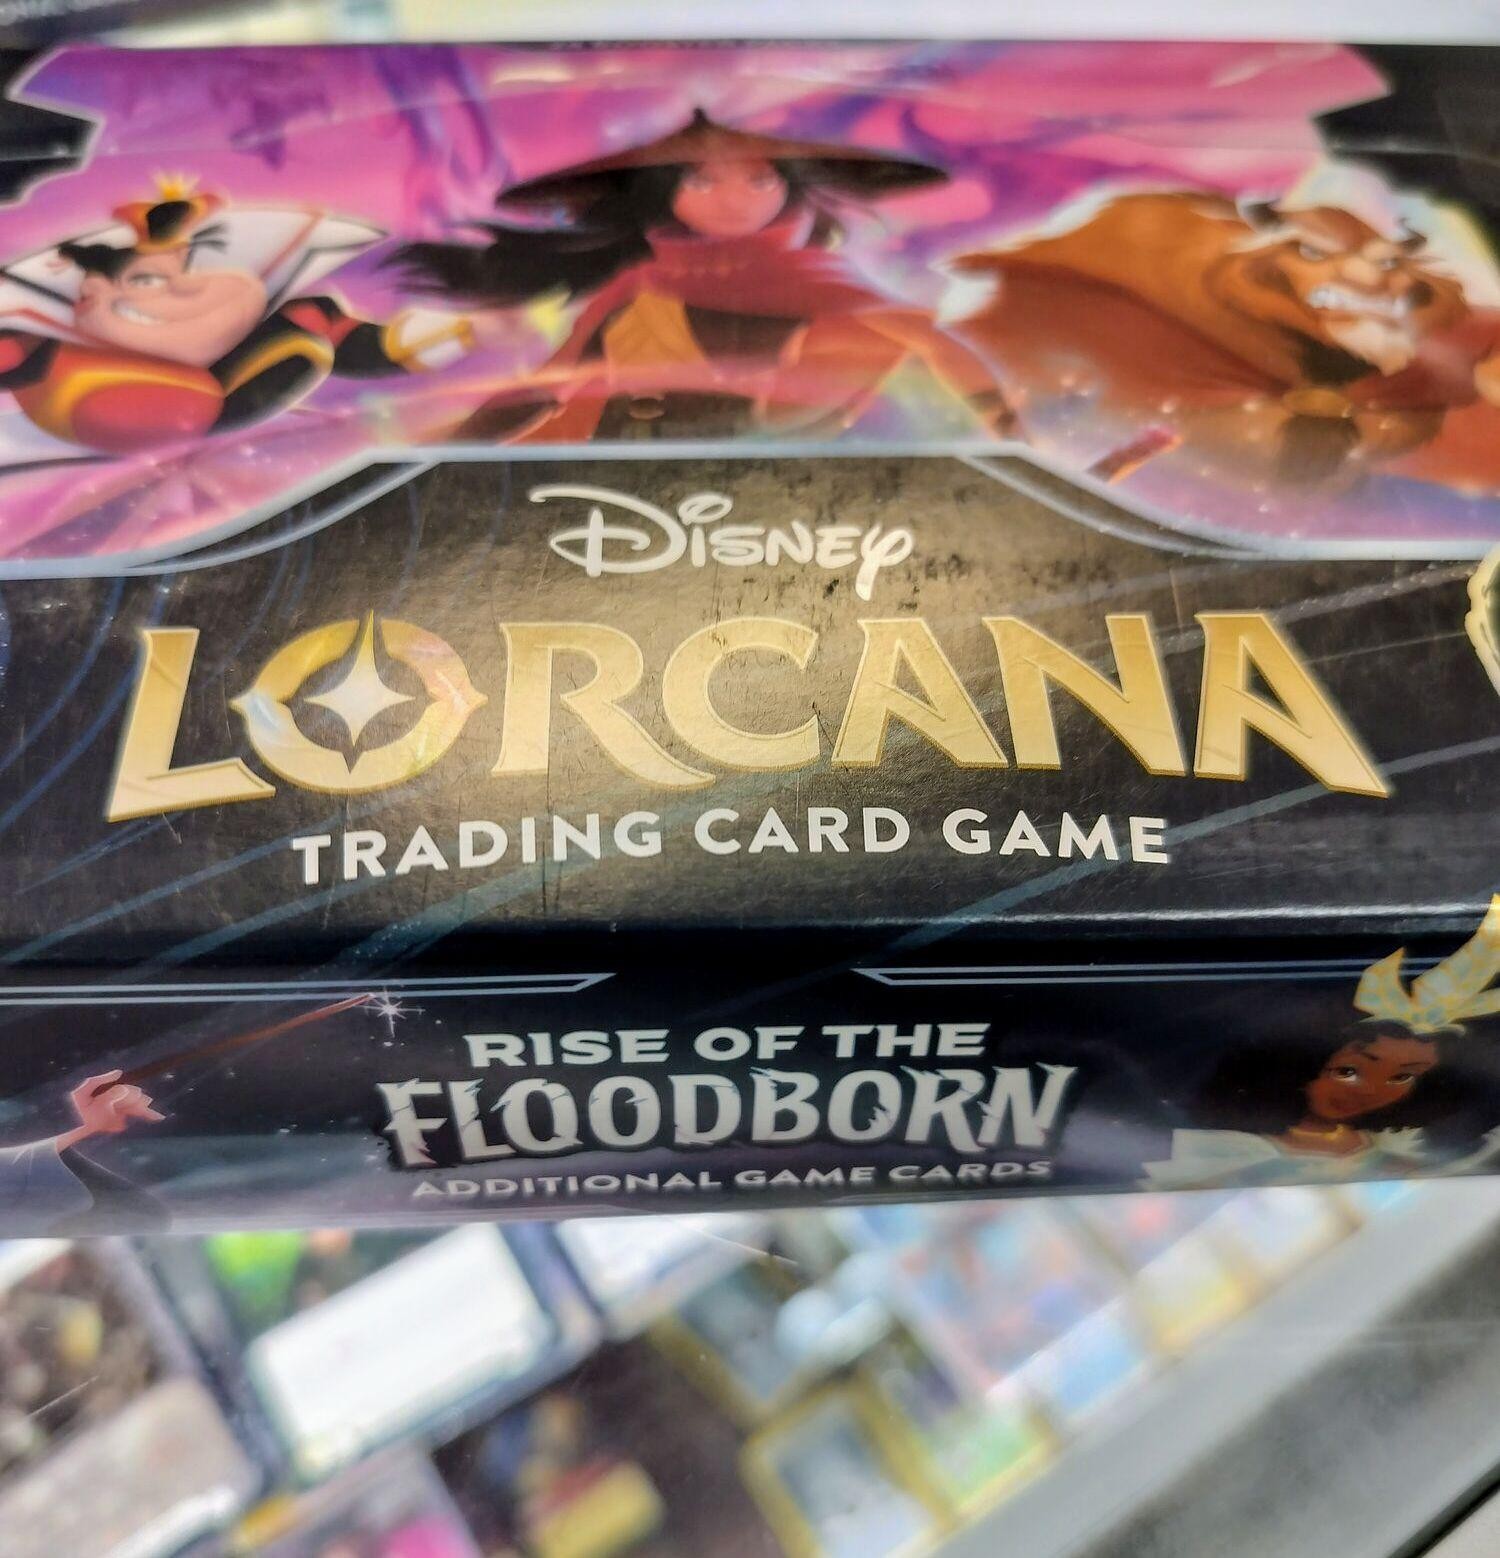 Rise of the Floodborn Additional Game Cards